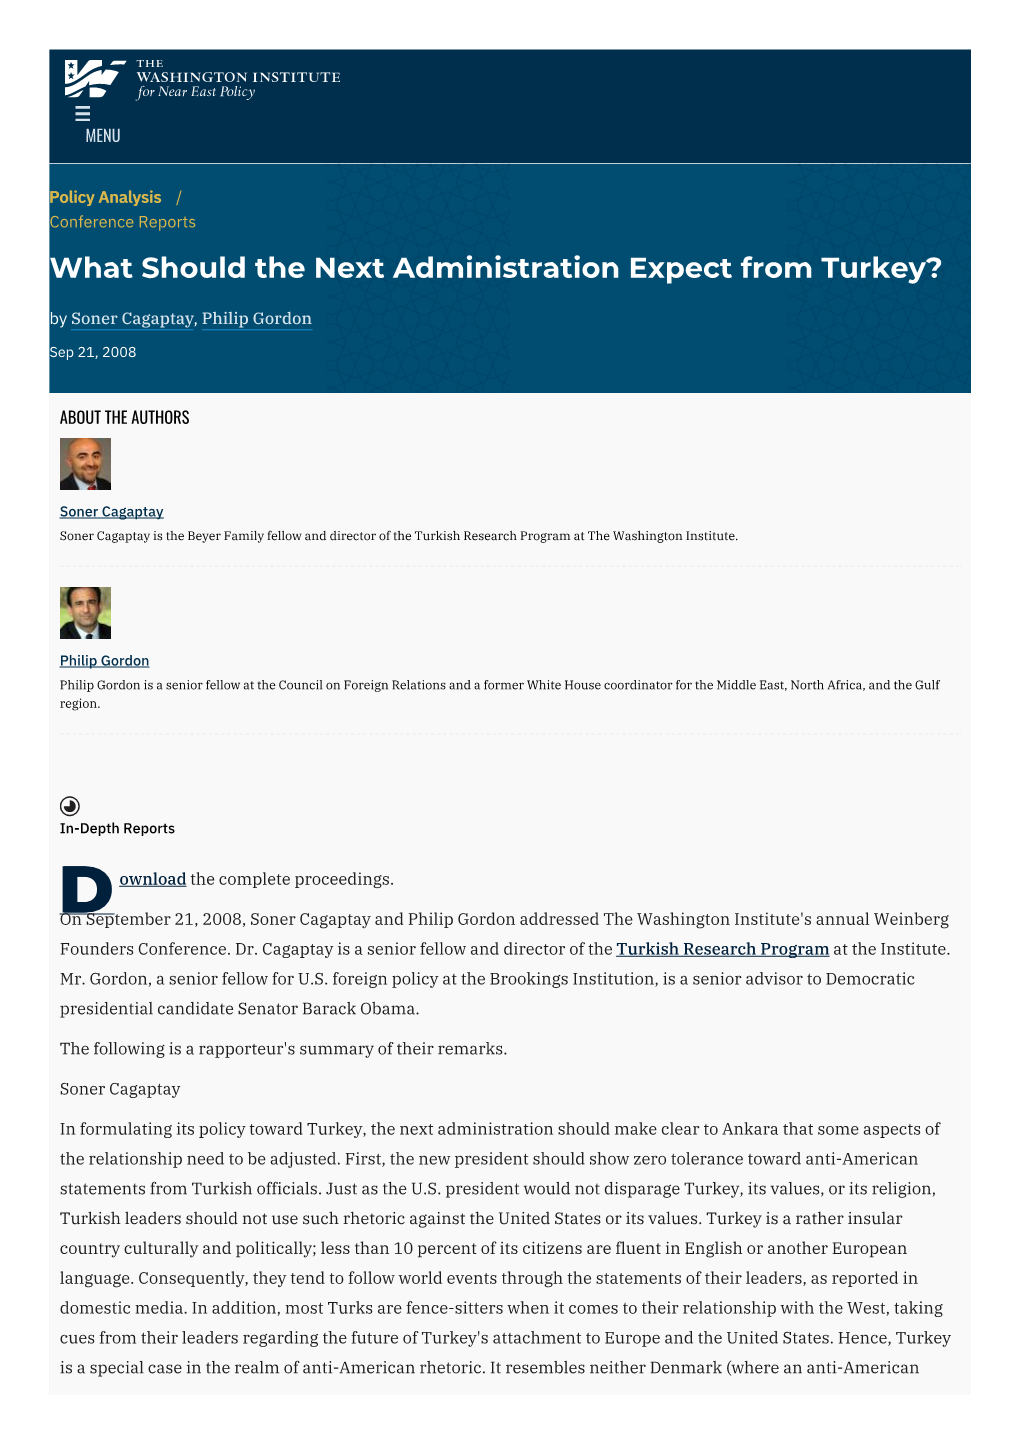 What Should the Next Administration Expect from Turkey? | The